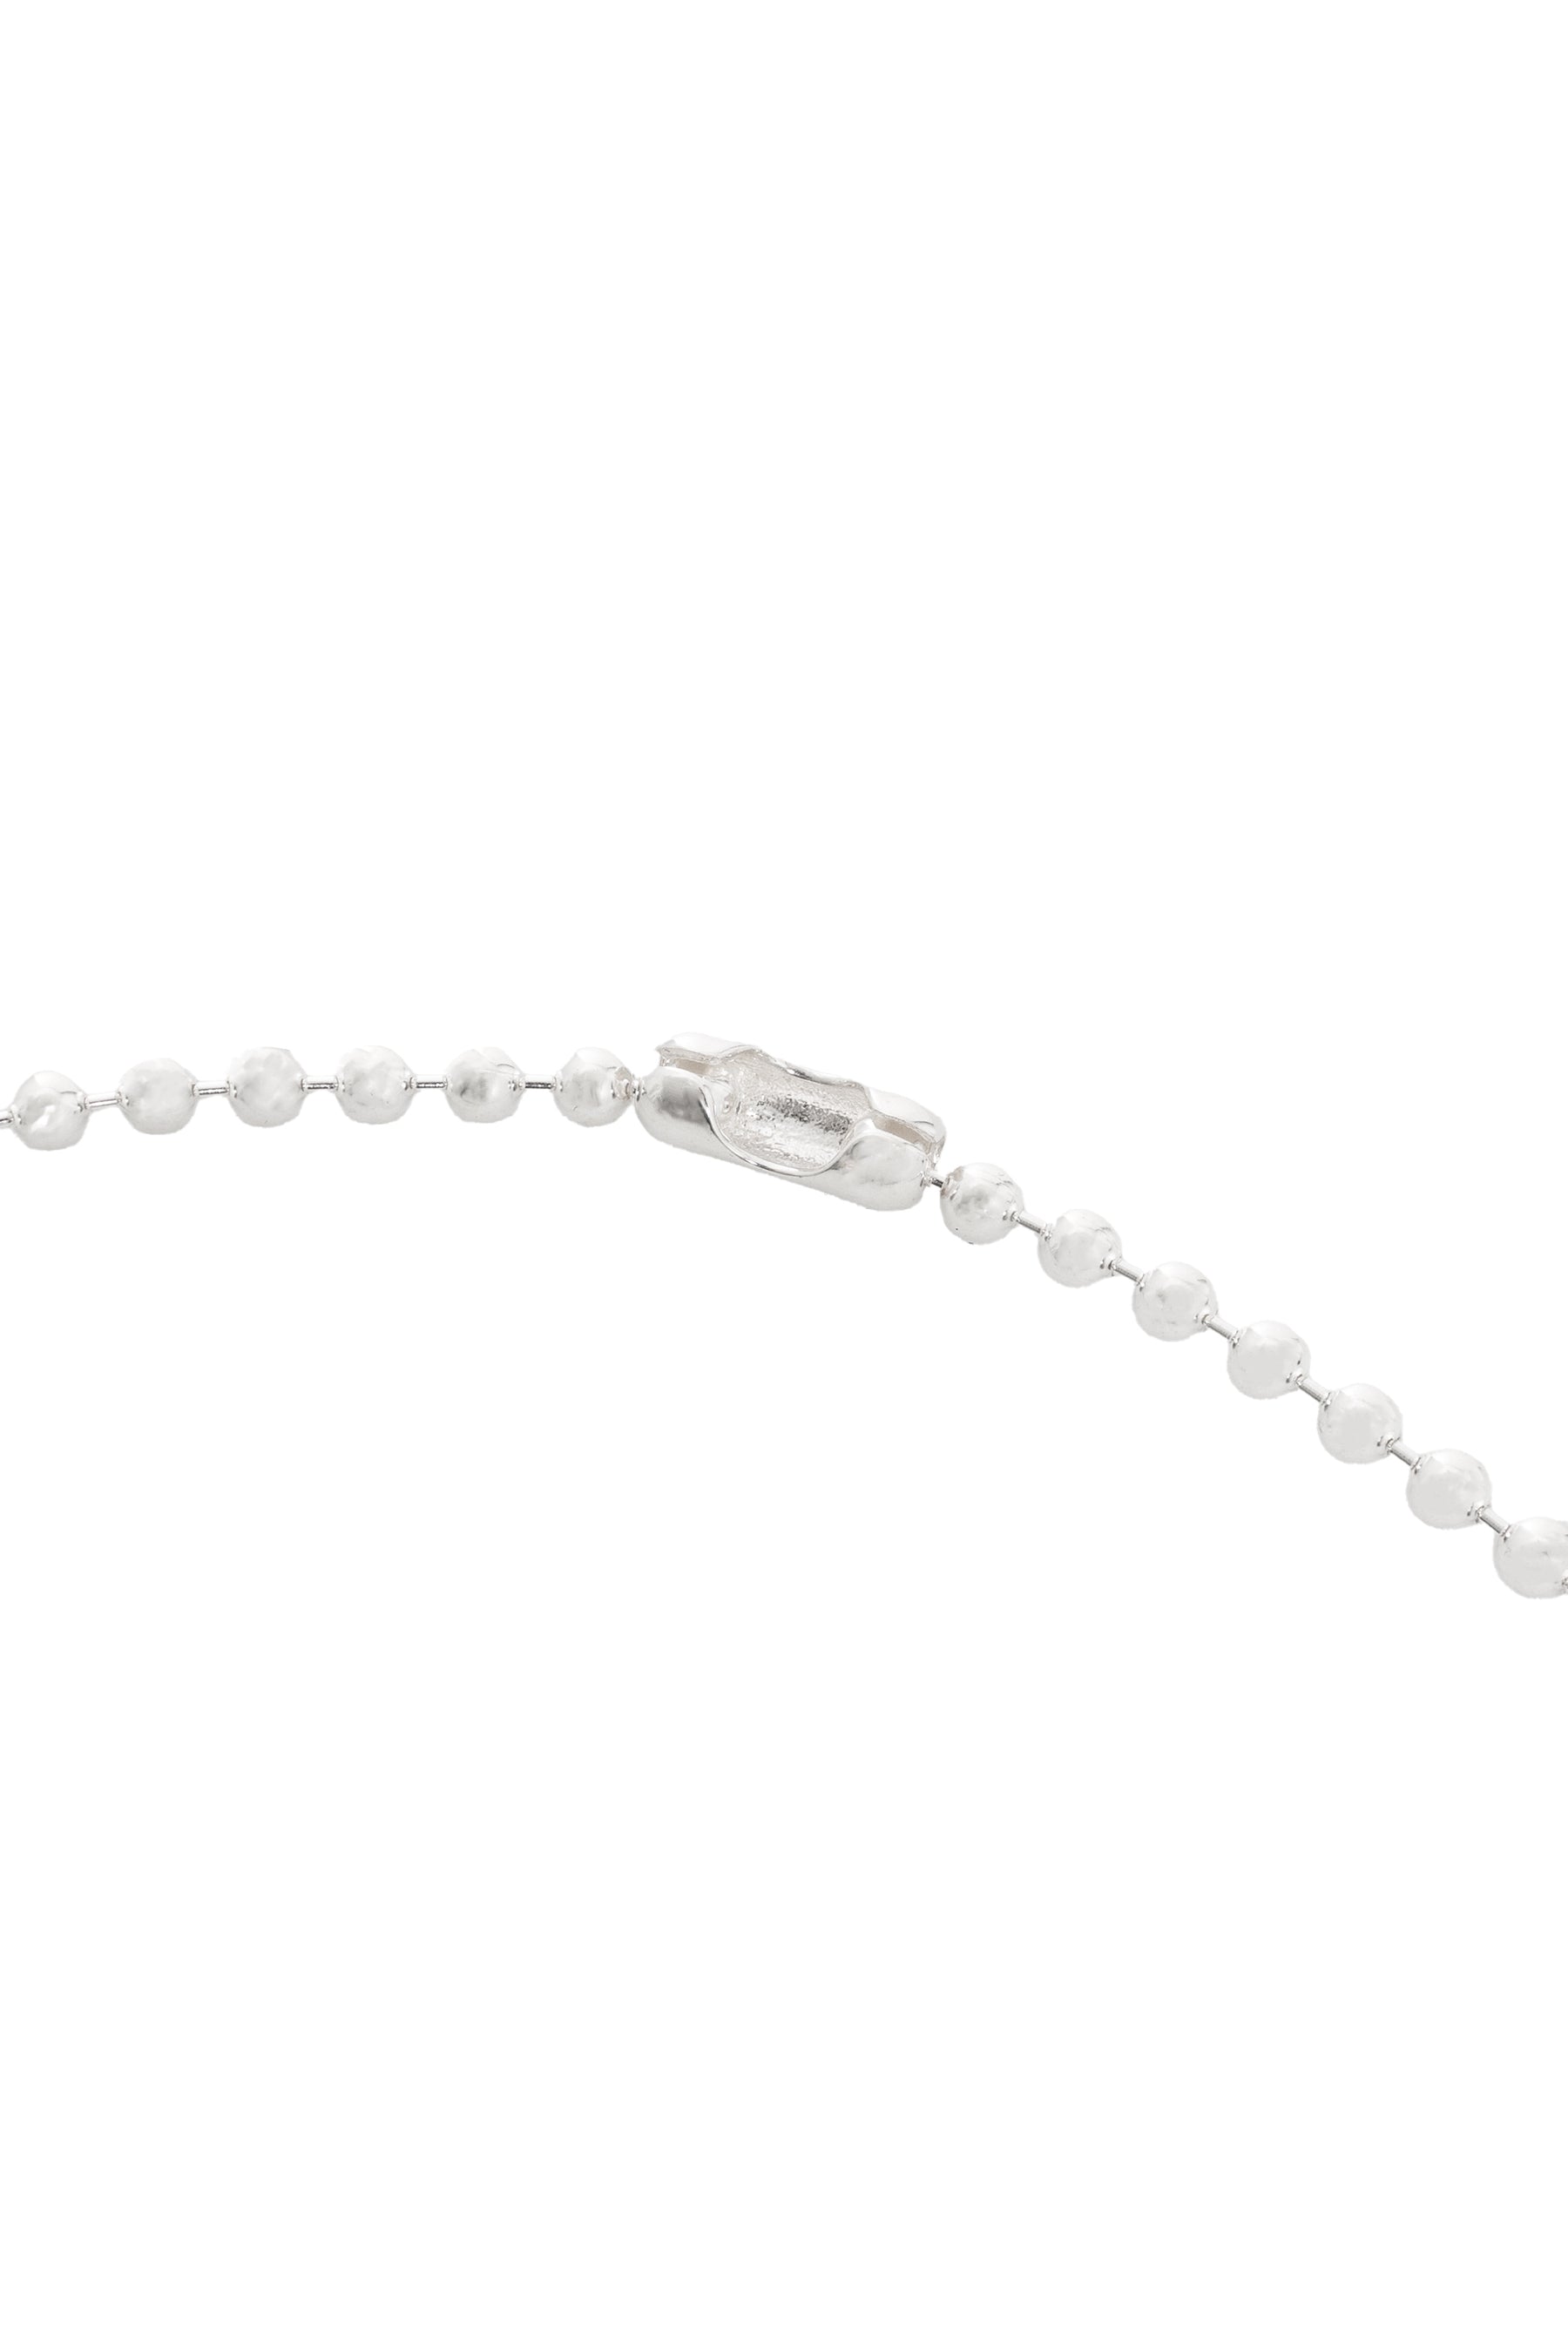 BALL CHAIN NECKLACE. -S- REGULAR / SIL